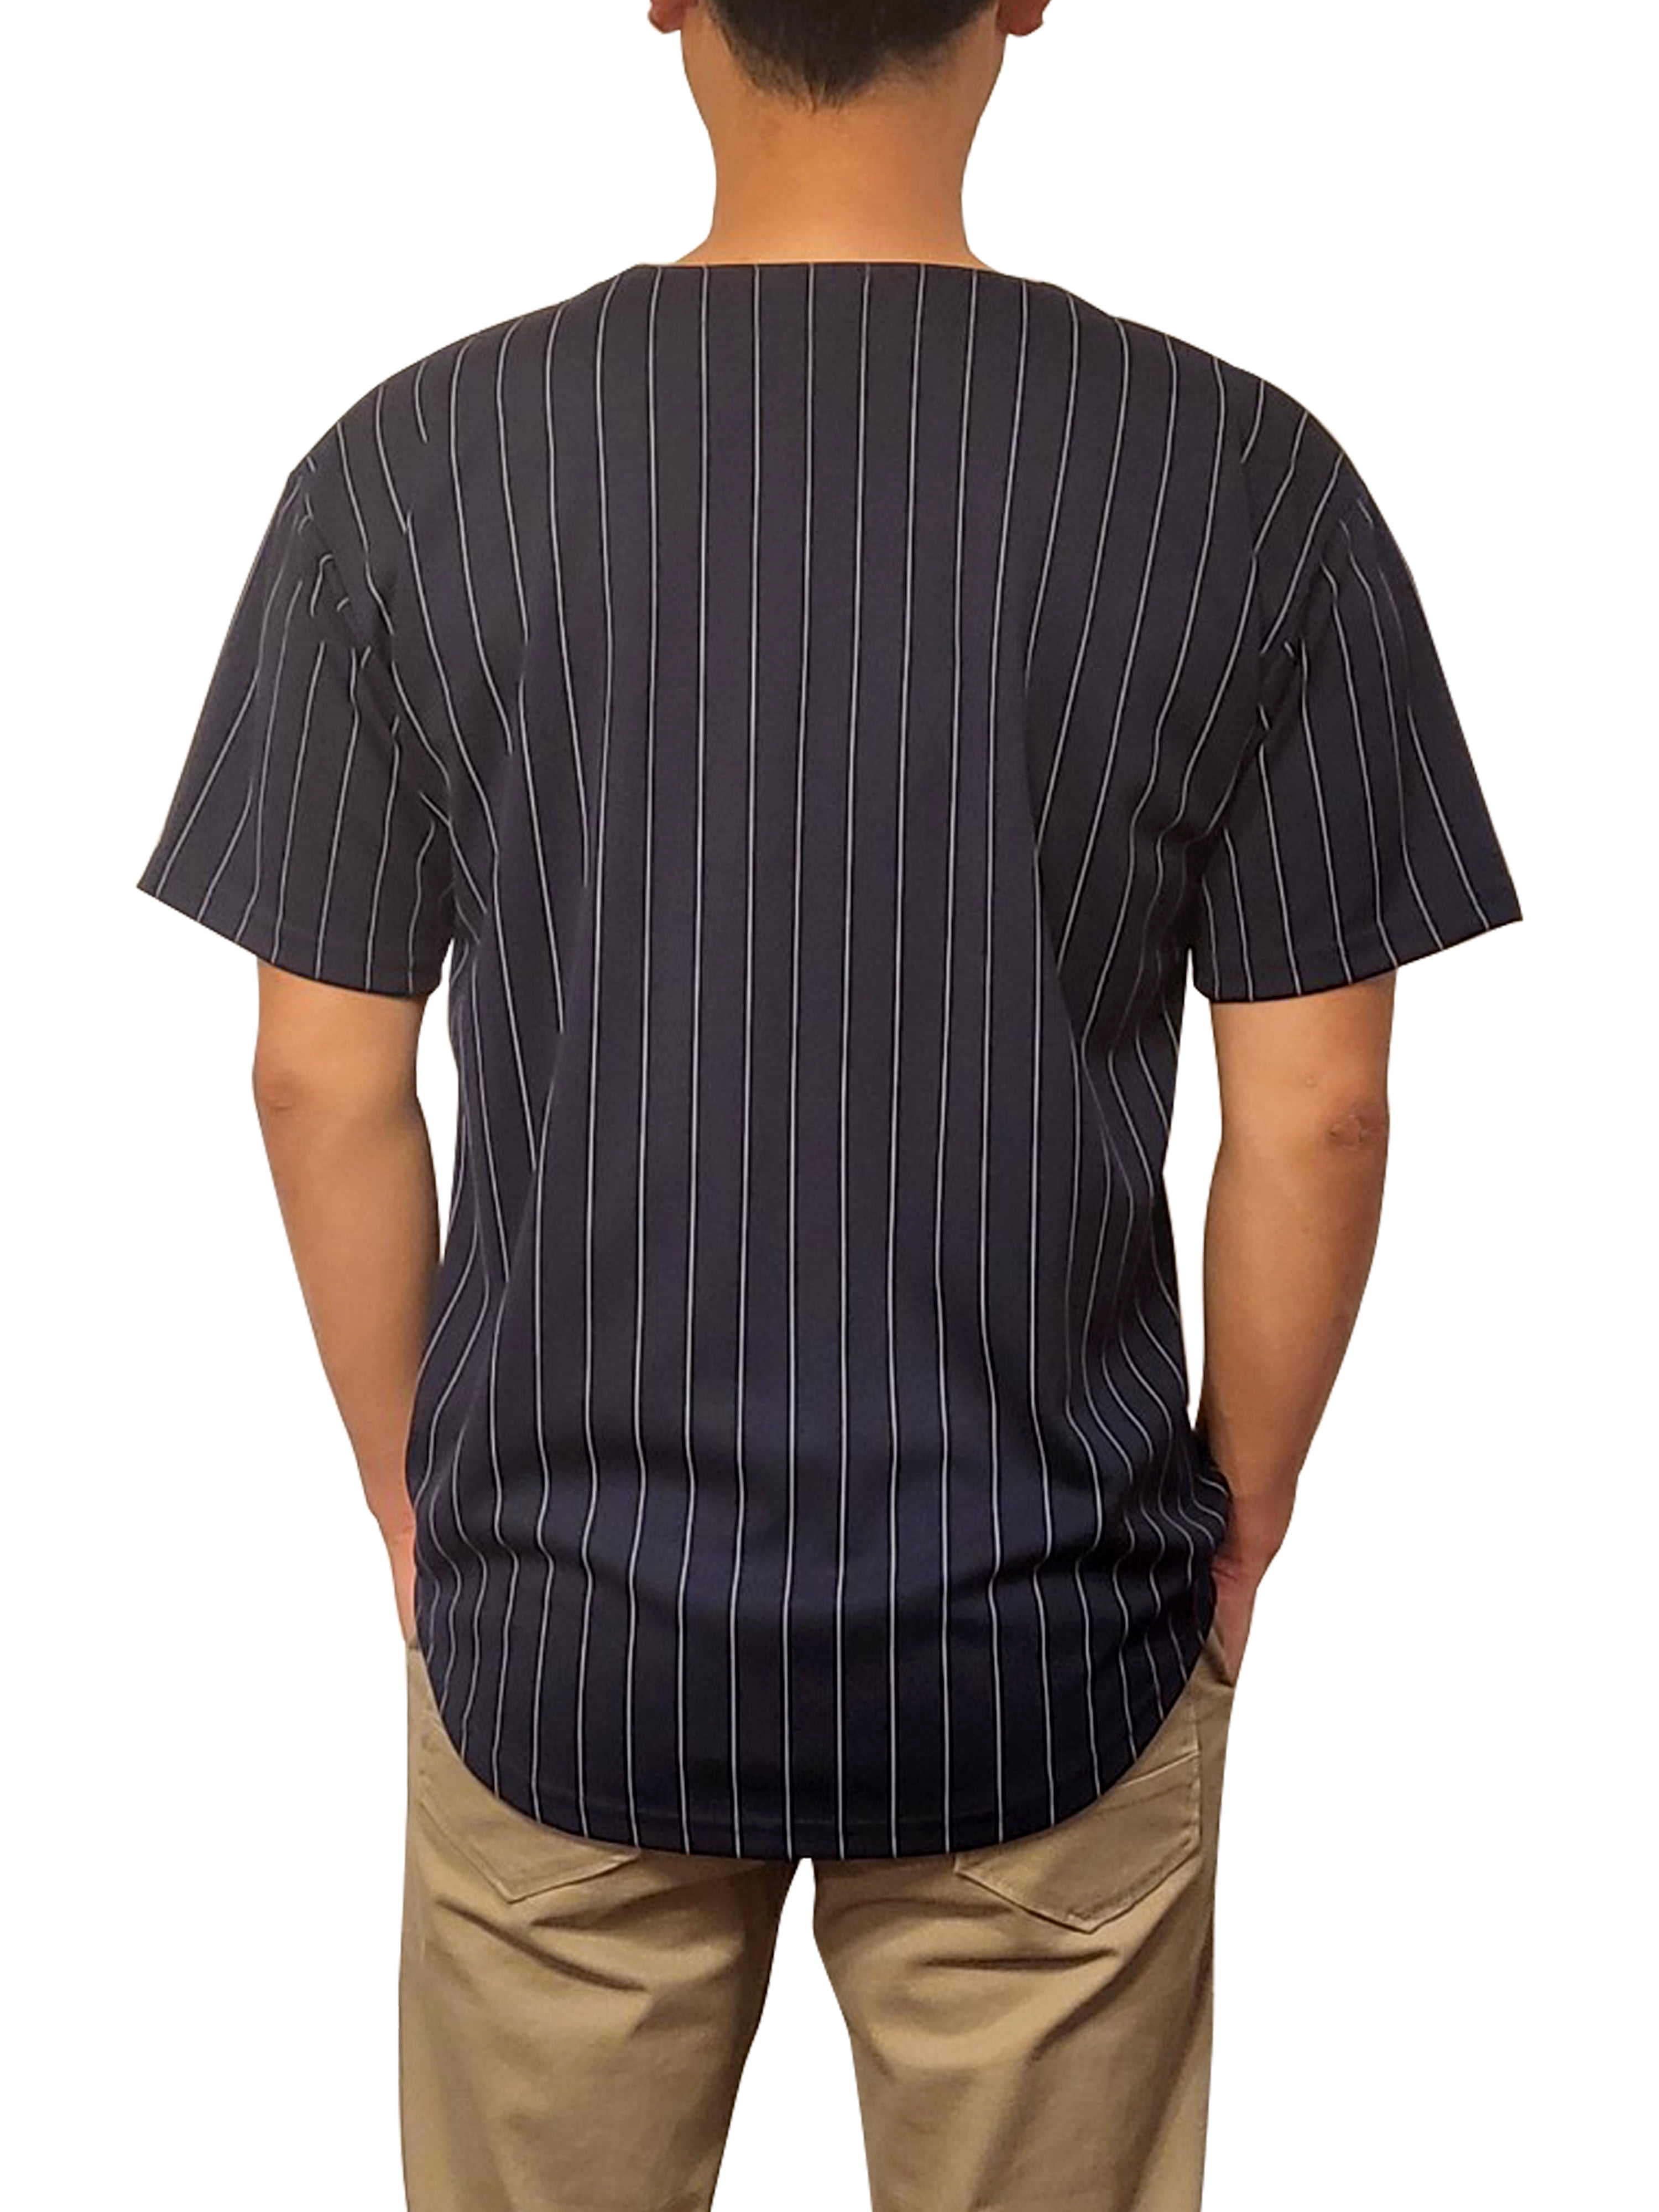 Lappel Men's Pinstripe Baseball Button Down Jersey College Sports Team  Uniforms Size up to 3XL Short Sleeve Athletic Sports Tee Shirts Made in USA  